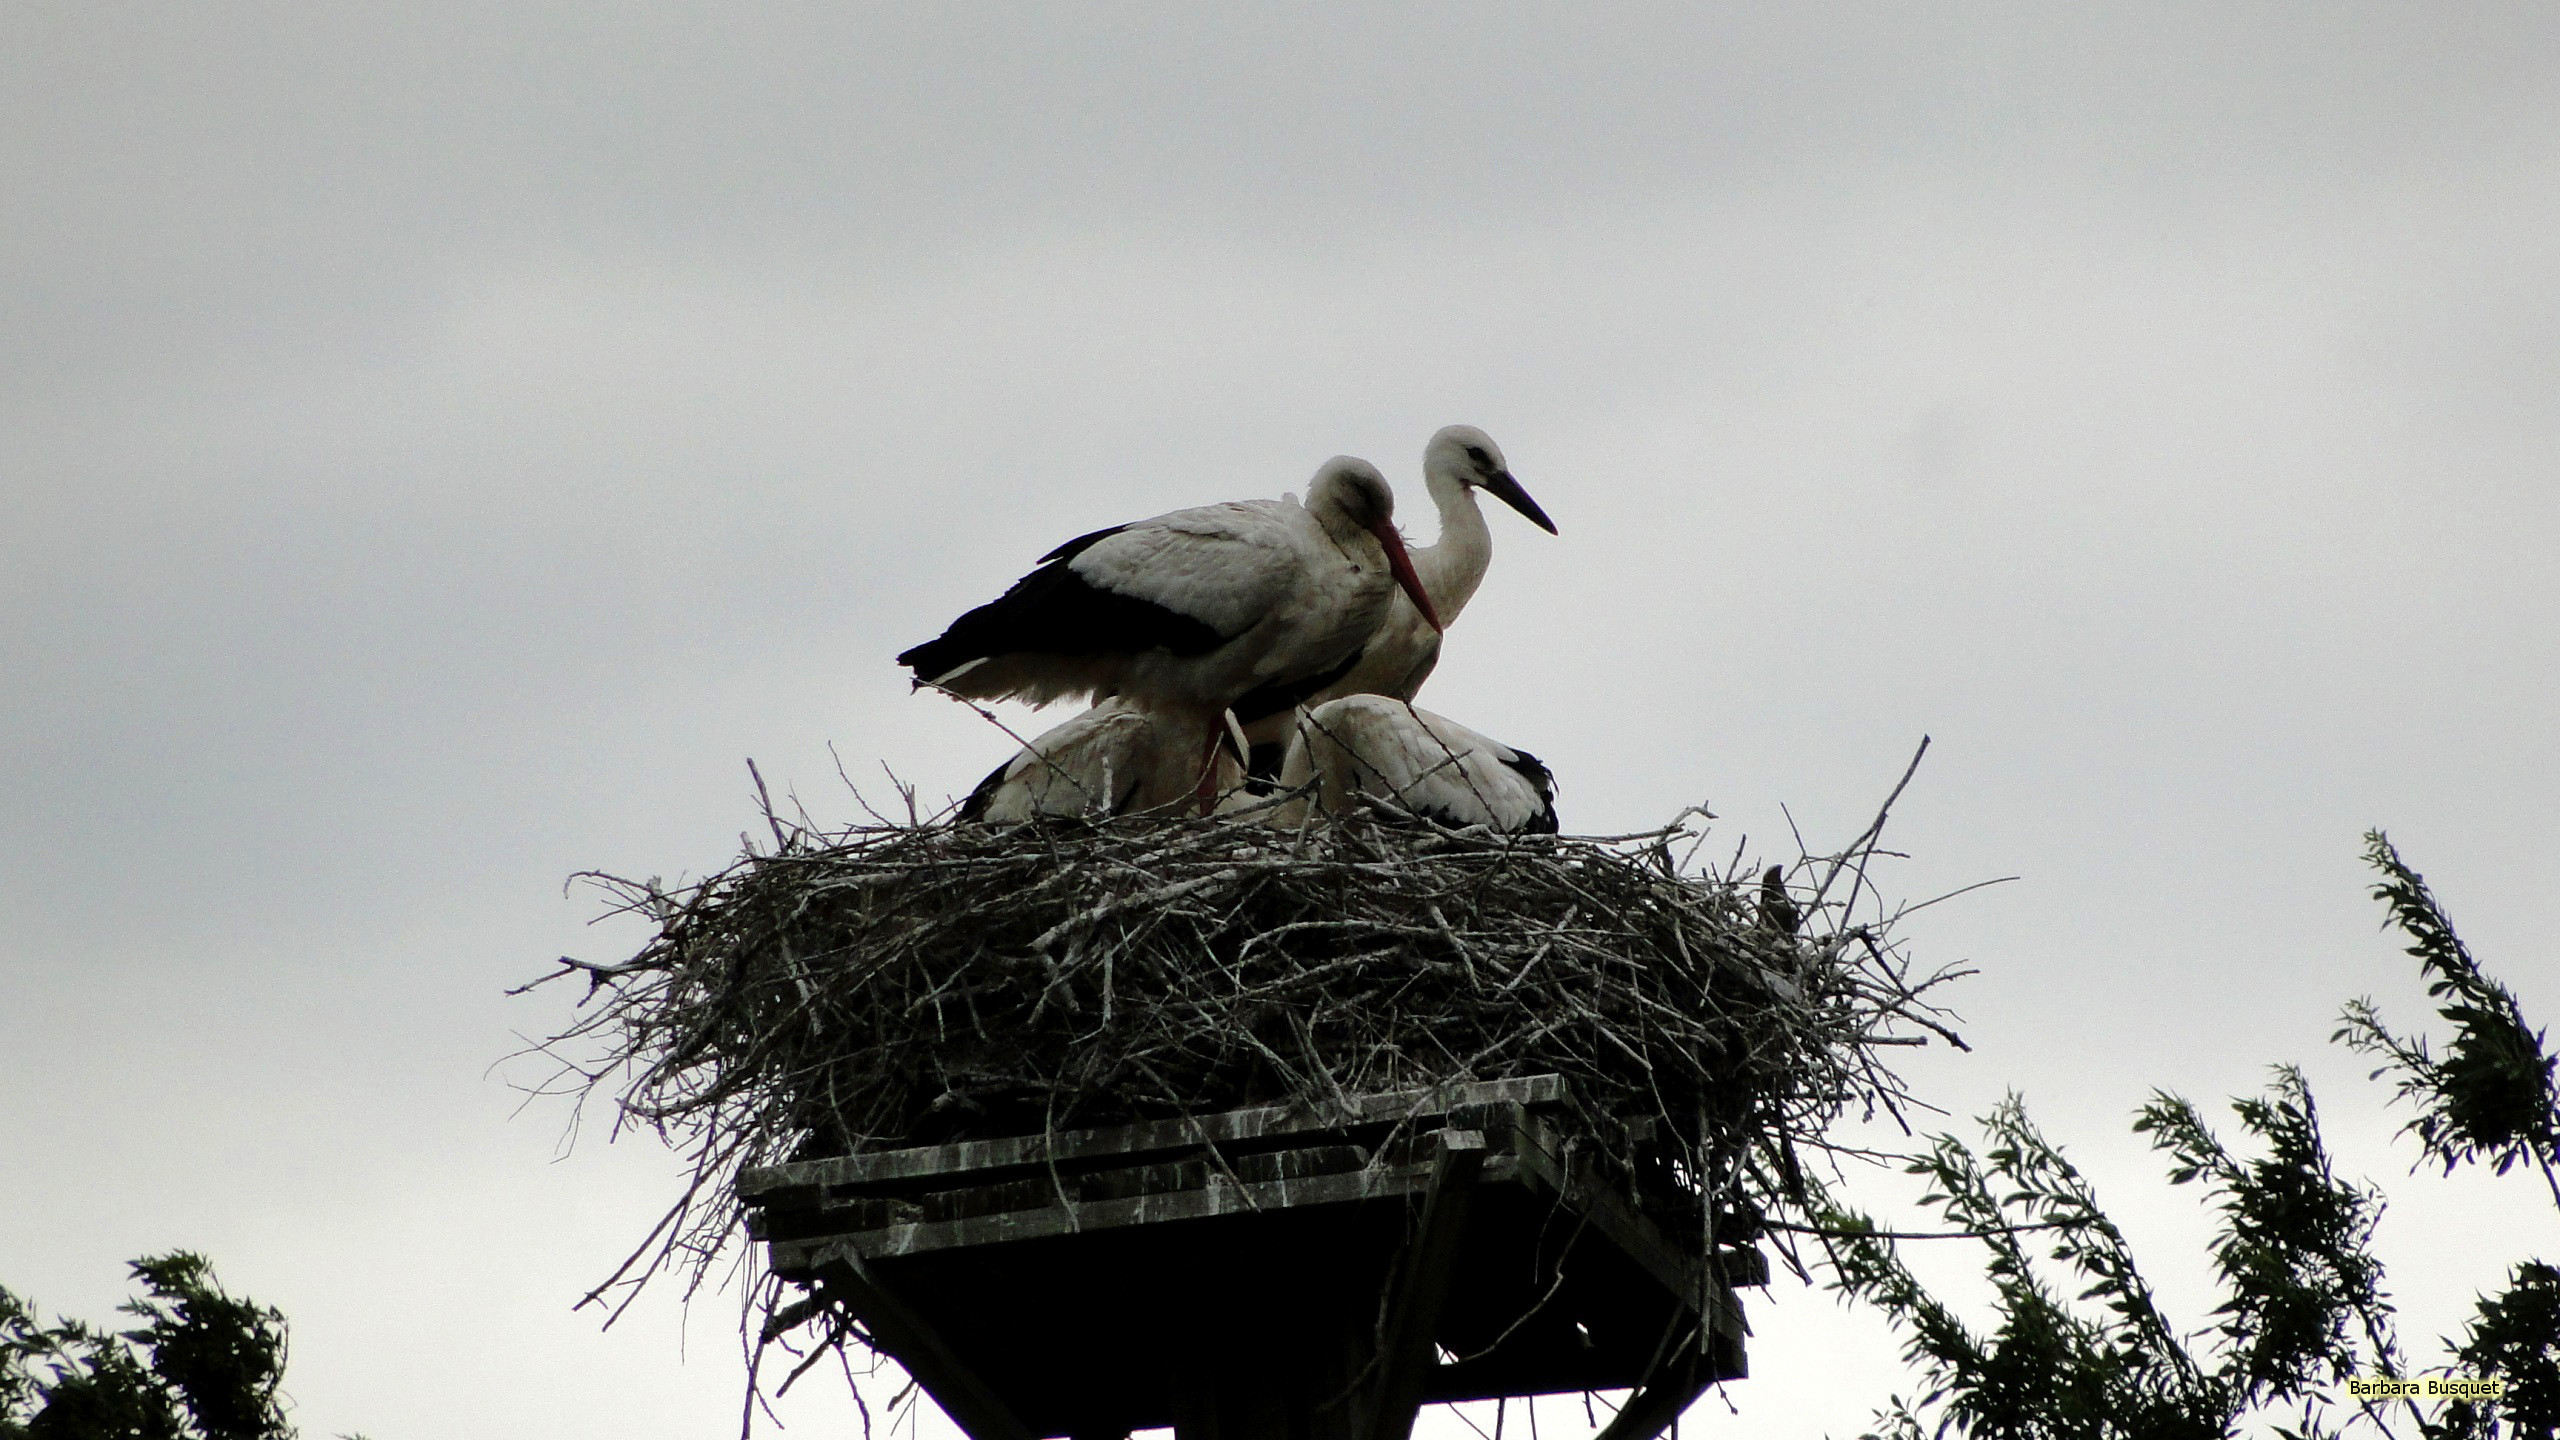 Hd Wallpaper With White Storks In Their Nest From There They Can Watch A Big Part Of The Whole Neighbourhood 2560x1440